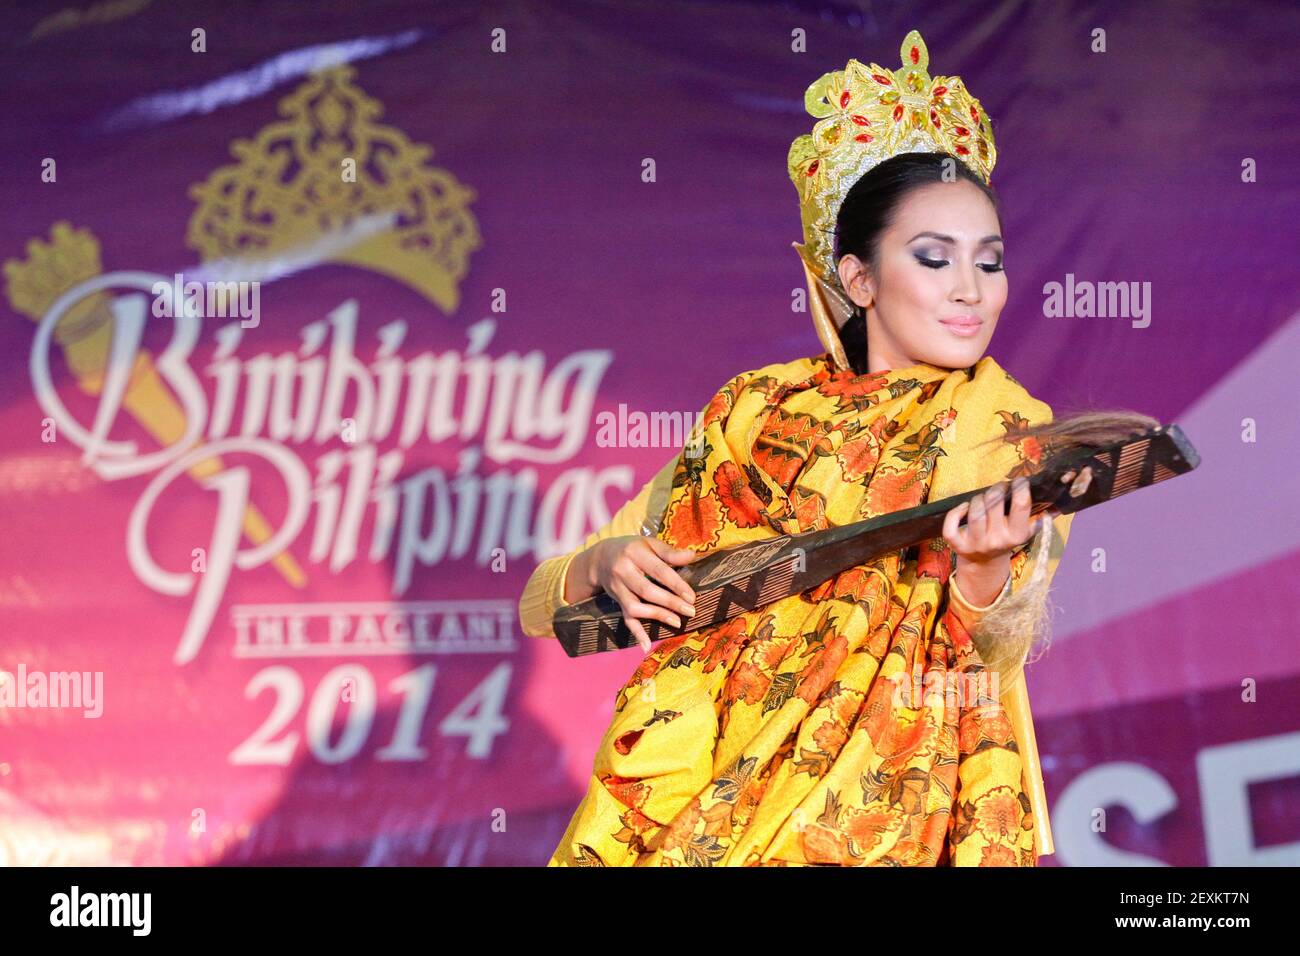 Quezon City, Philippines - A beauty pageant candidate performs a traditional Muslim dance while playing an instrument during the talent show portion of the Binibining Pilipinas 2014 held on Valentine's Day. The winners of the competition will represent the Philippines in different international beaty pageant contests. (Photo by Mark Cristino/Pacific Press/Sipa USA) Stock Photo